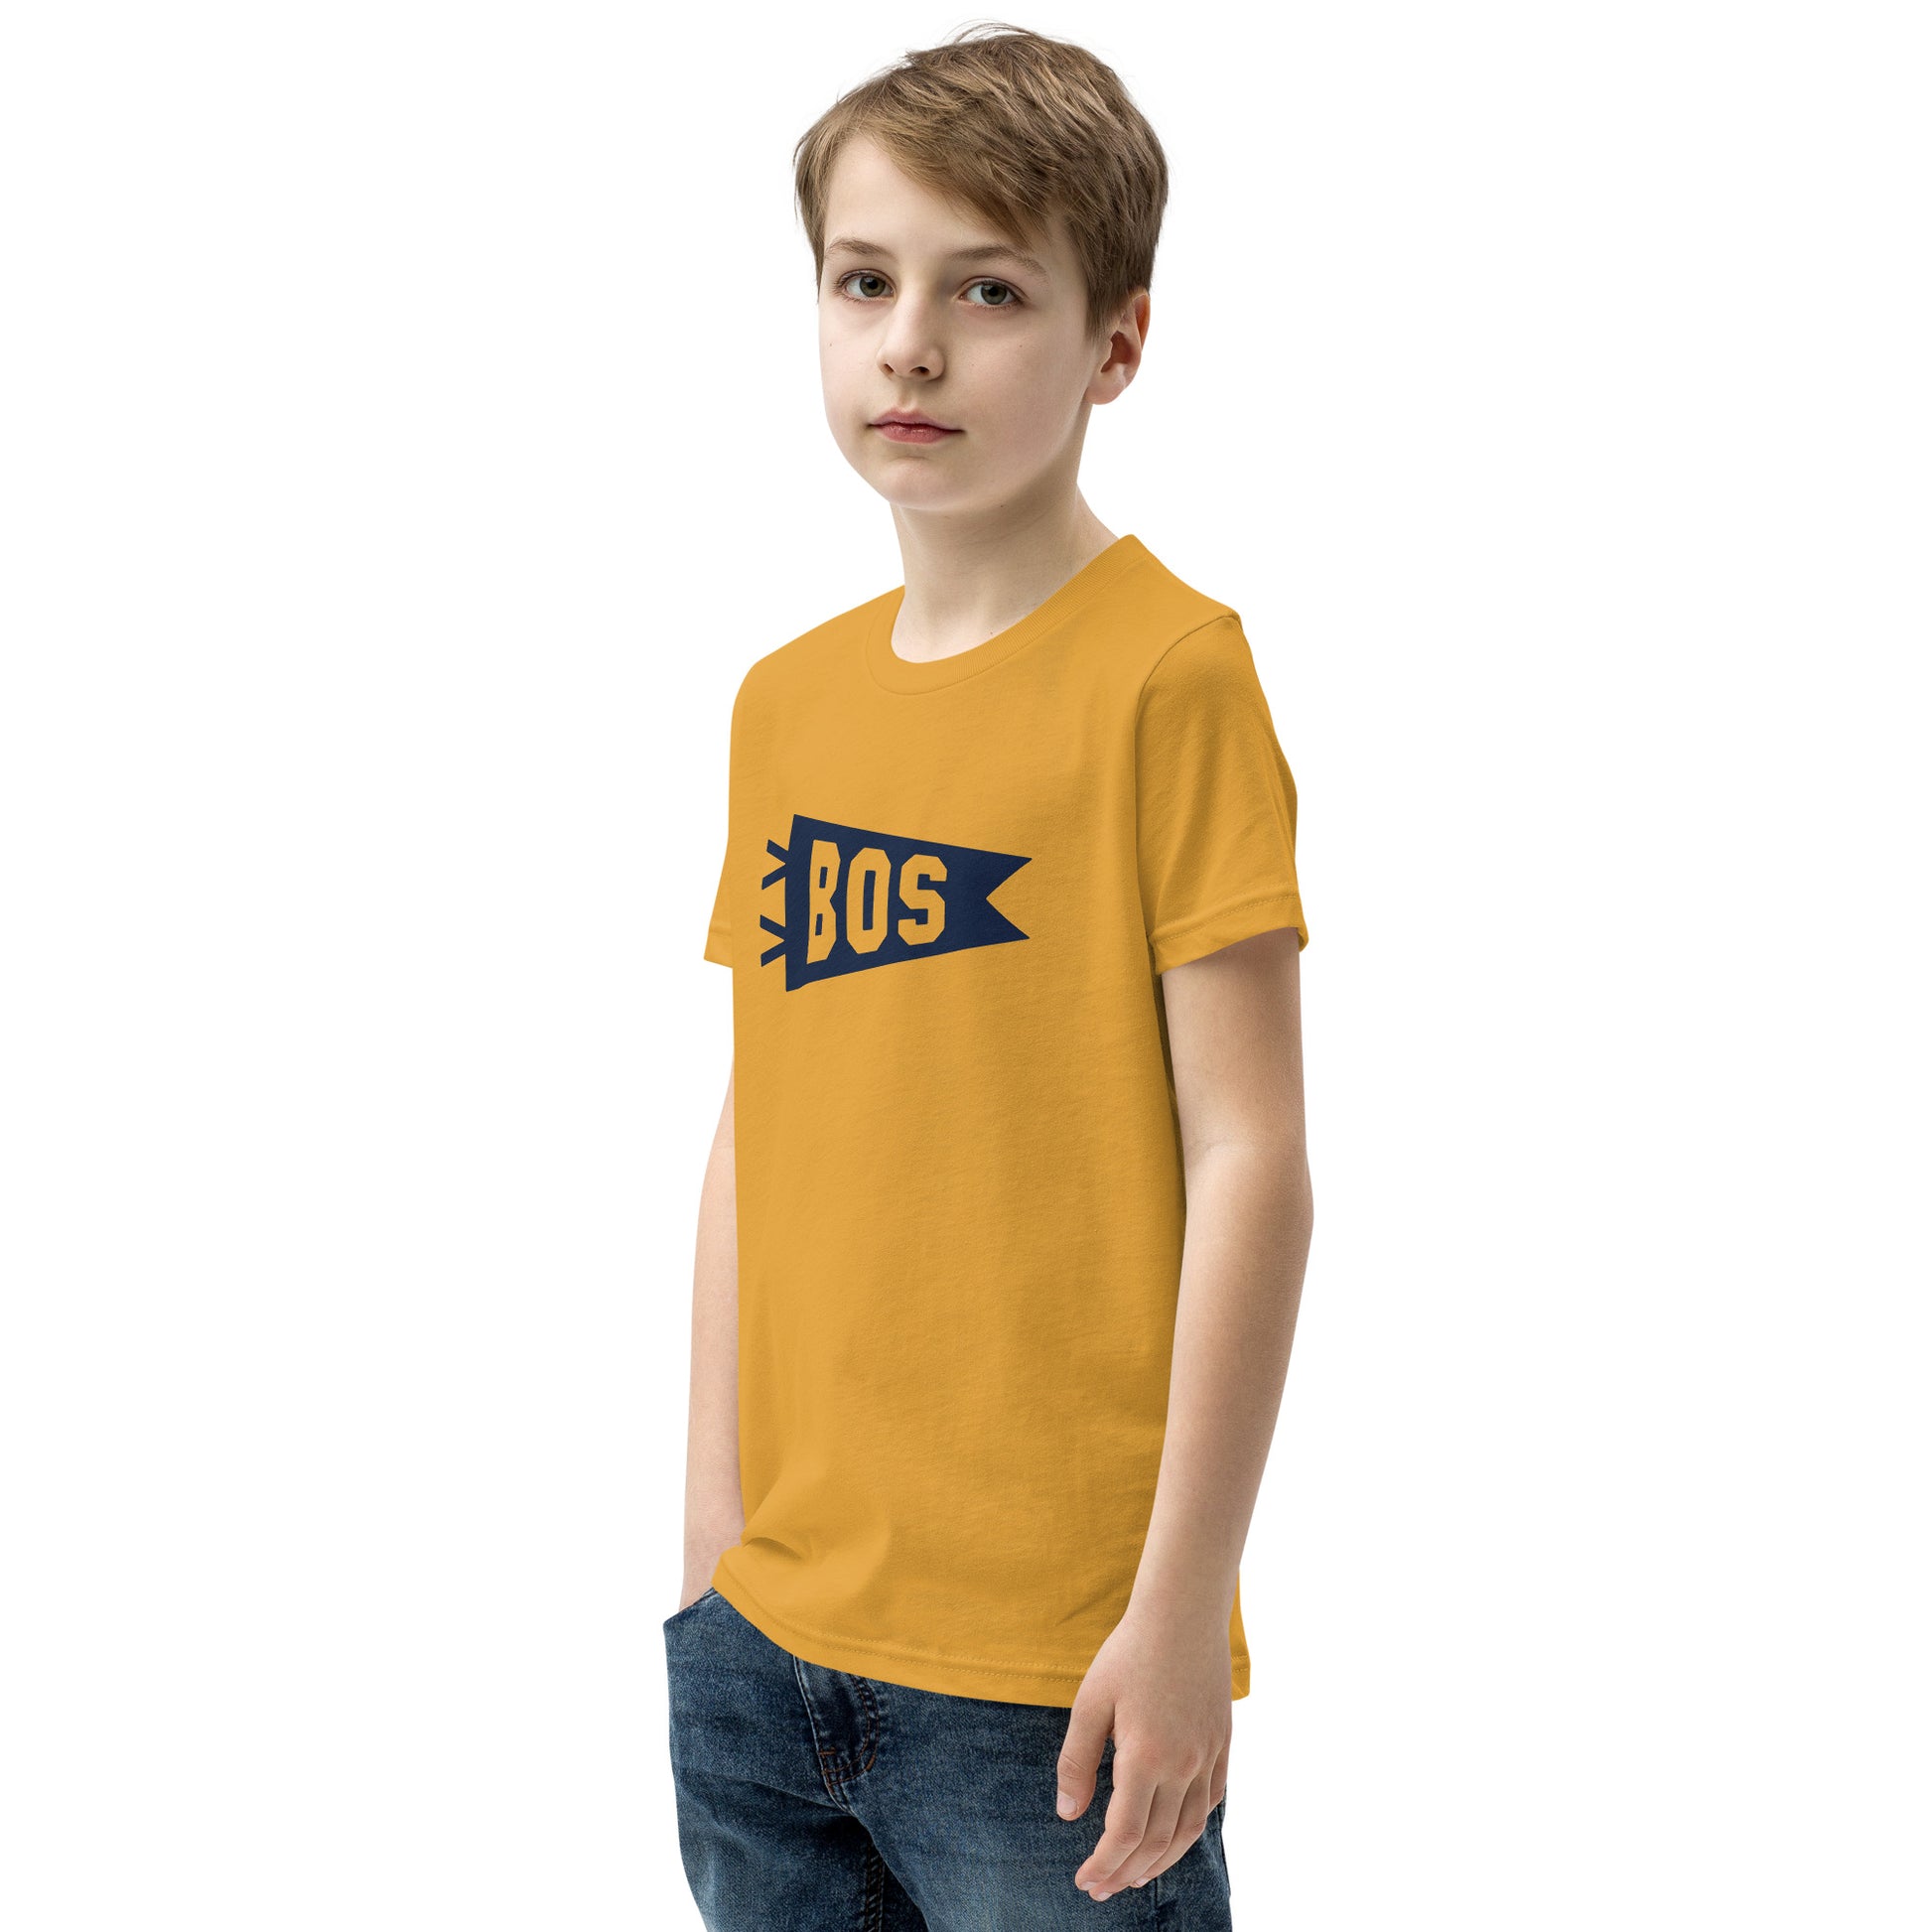 Kid's Airport Code Tee - Navy Blue Graphic • BOS Boston • YHM Designs - Image 06